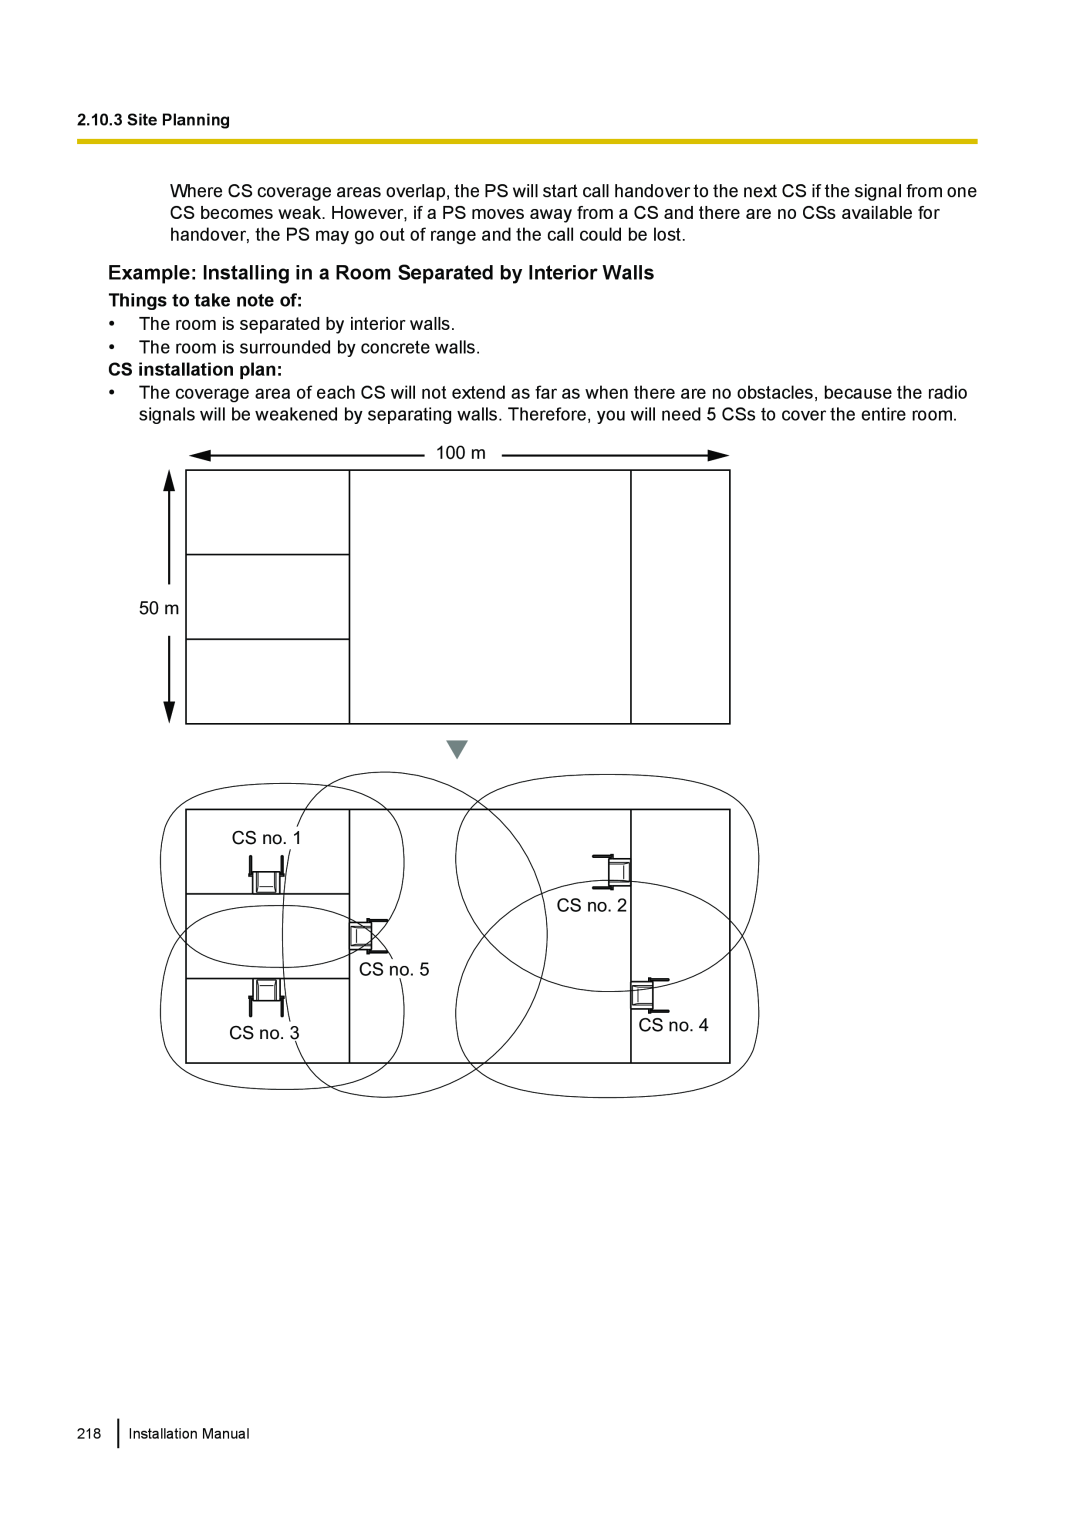 Panasonic KX-TDA100 Example Installing in a Room Separated by Interior Walls, Things to take note of, CS installation plan 